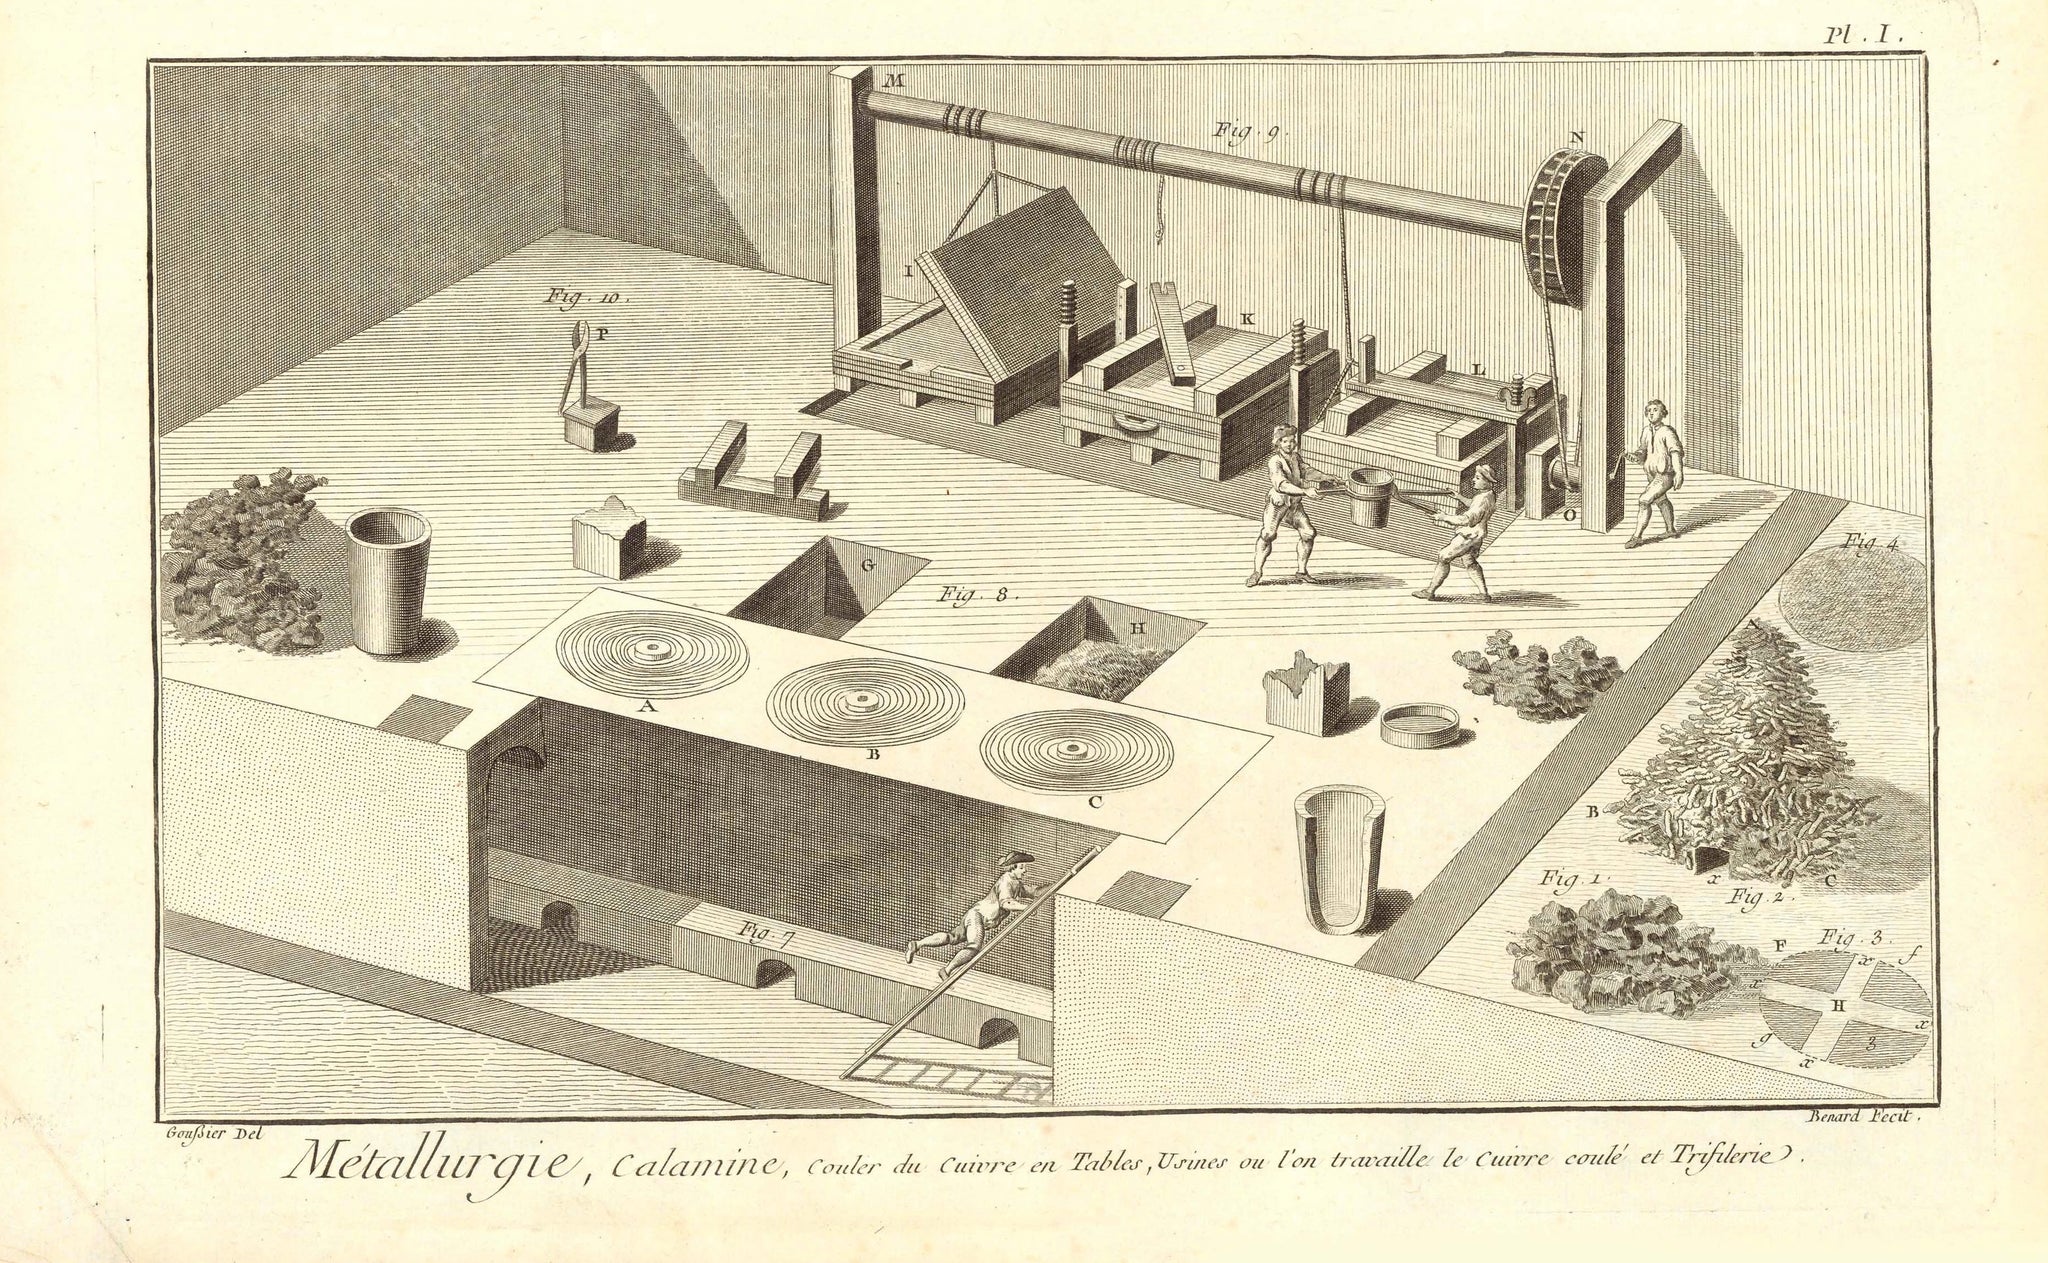 Antique print, Alter Stich, Calamine, Smithsonite, Copper, Kupfer, Cobre, Forja, Metallurgie, Huettenwesen, Metalurgia  Copper engraving from the Encyclopedia by D. Diderot and J: L'Ambert. Published in Paris in several editions ca 1770.